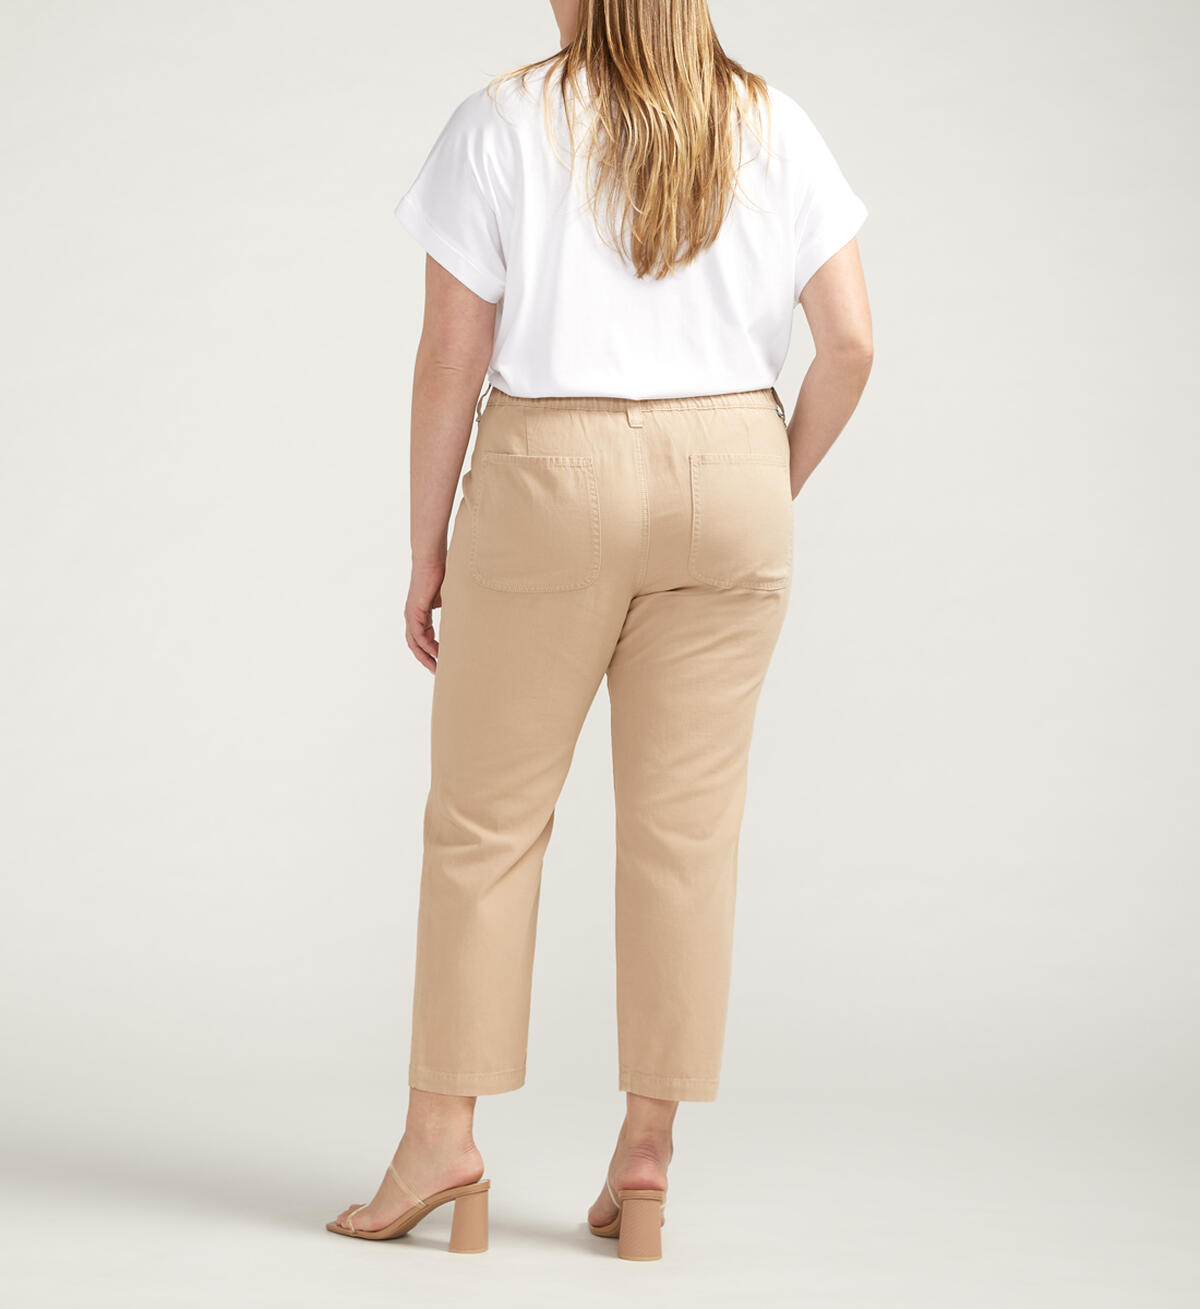 Chino Tailored Cropped Pants Plus Size, , hi-res image number 1